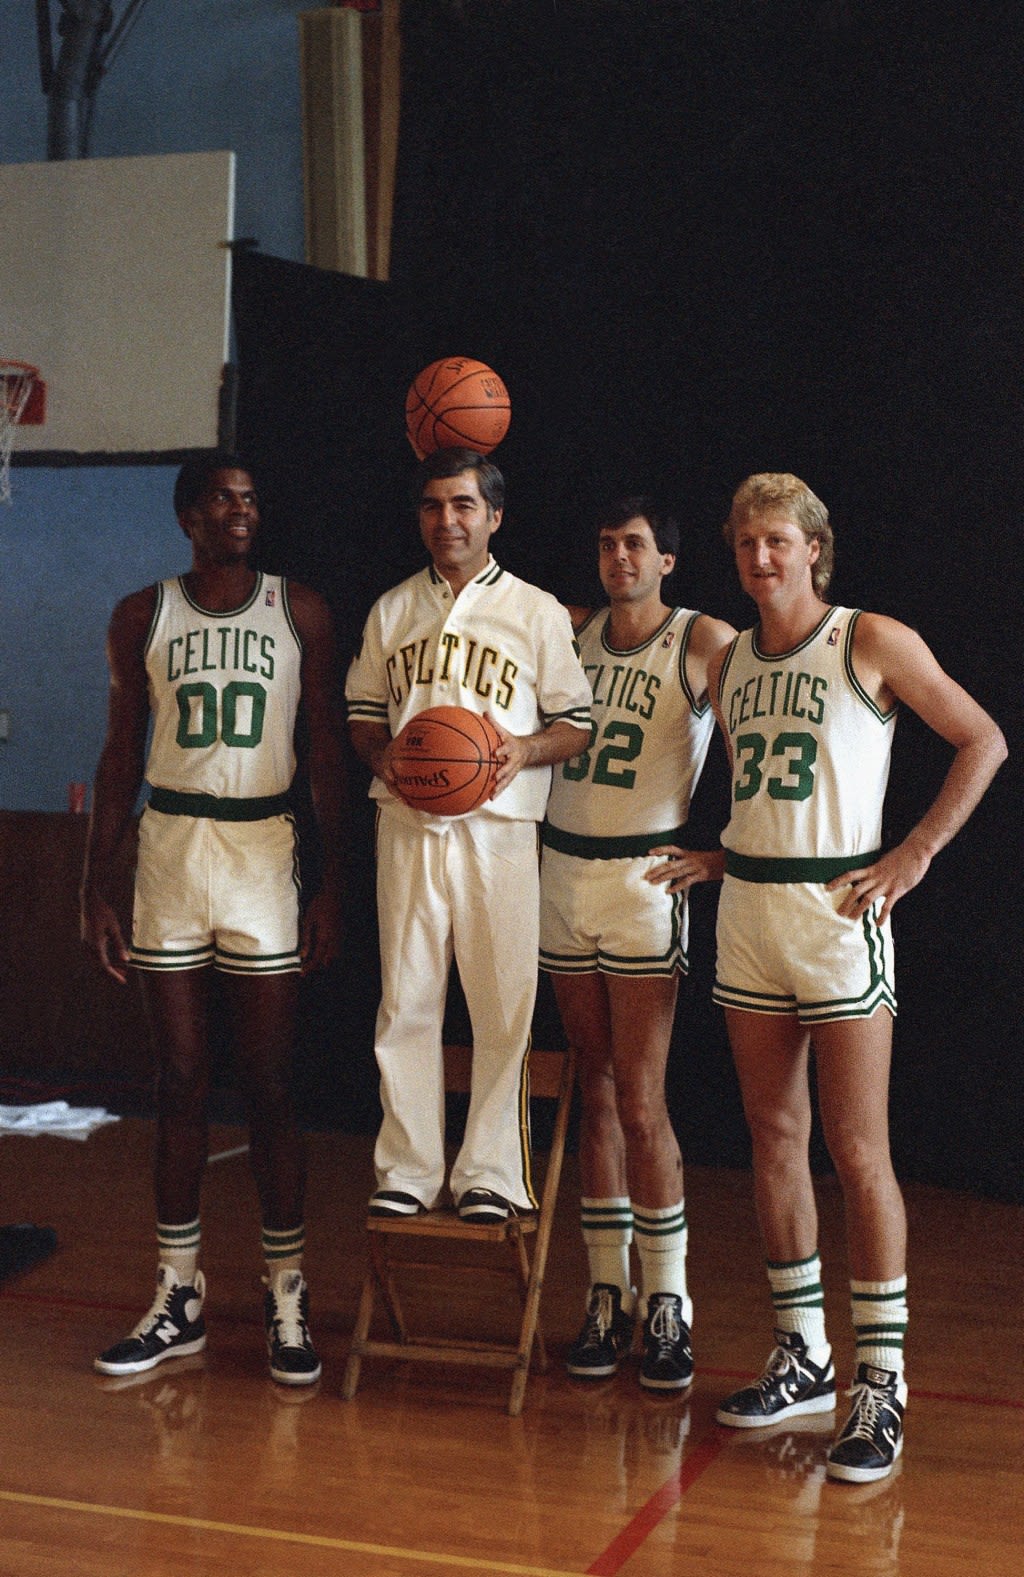 Lucas: Healey could use a Dukakis-style Celts photo op